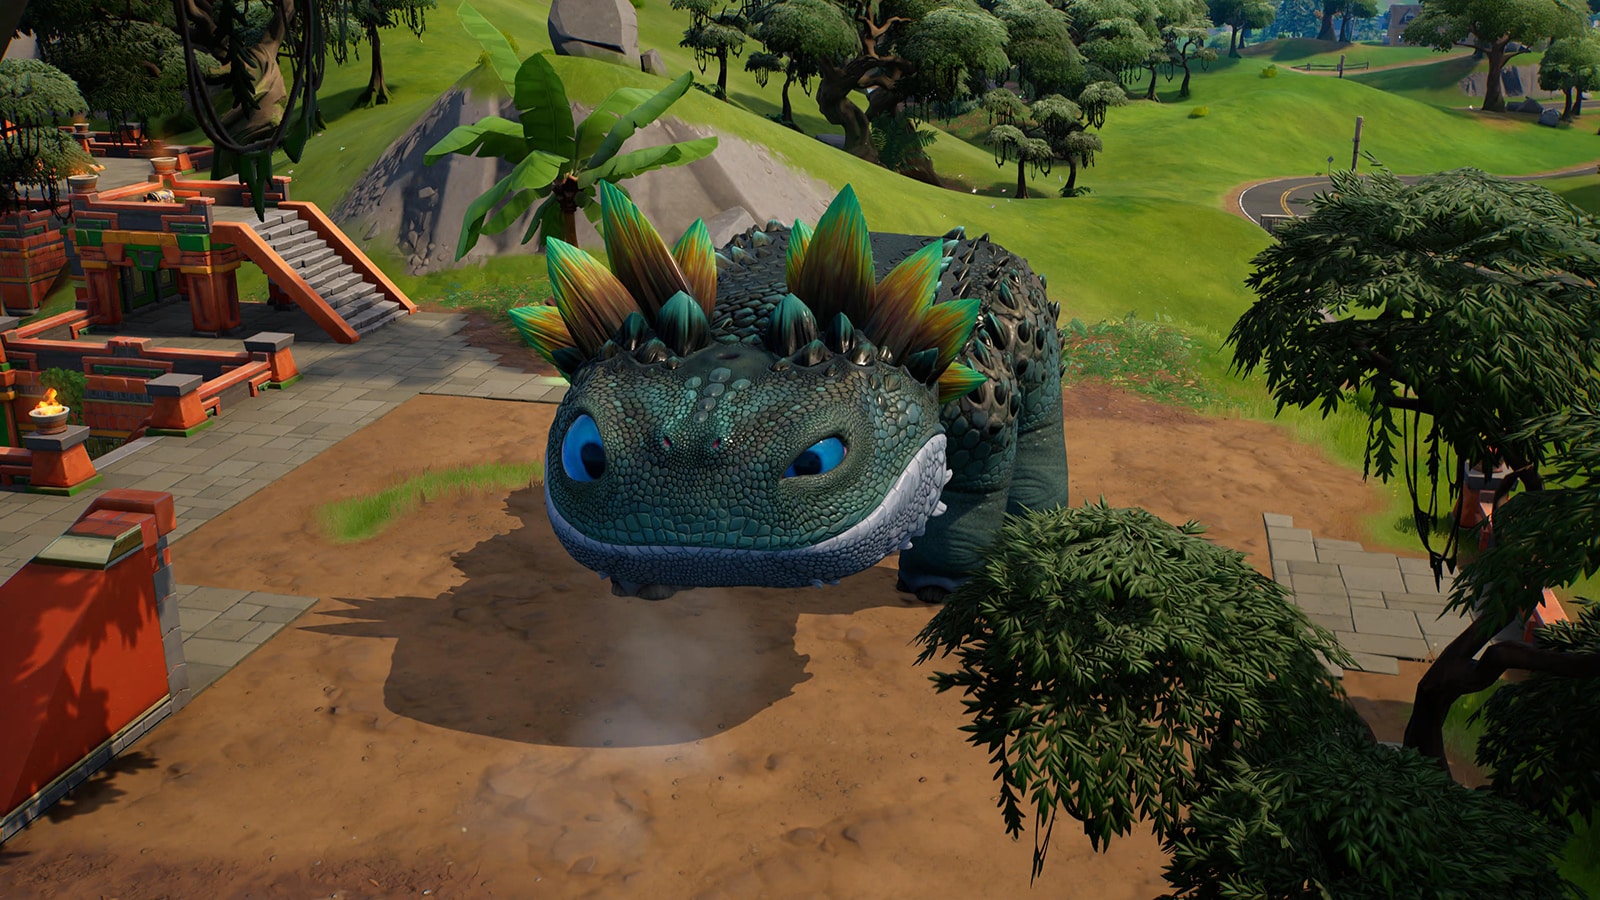 Fortnite fans are obsessed with Klombo dinosaurs after Tilted Towers update